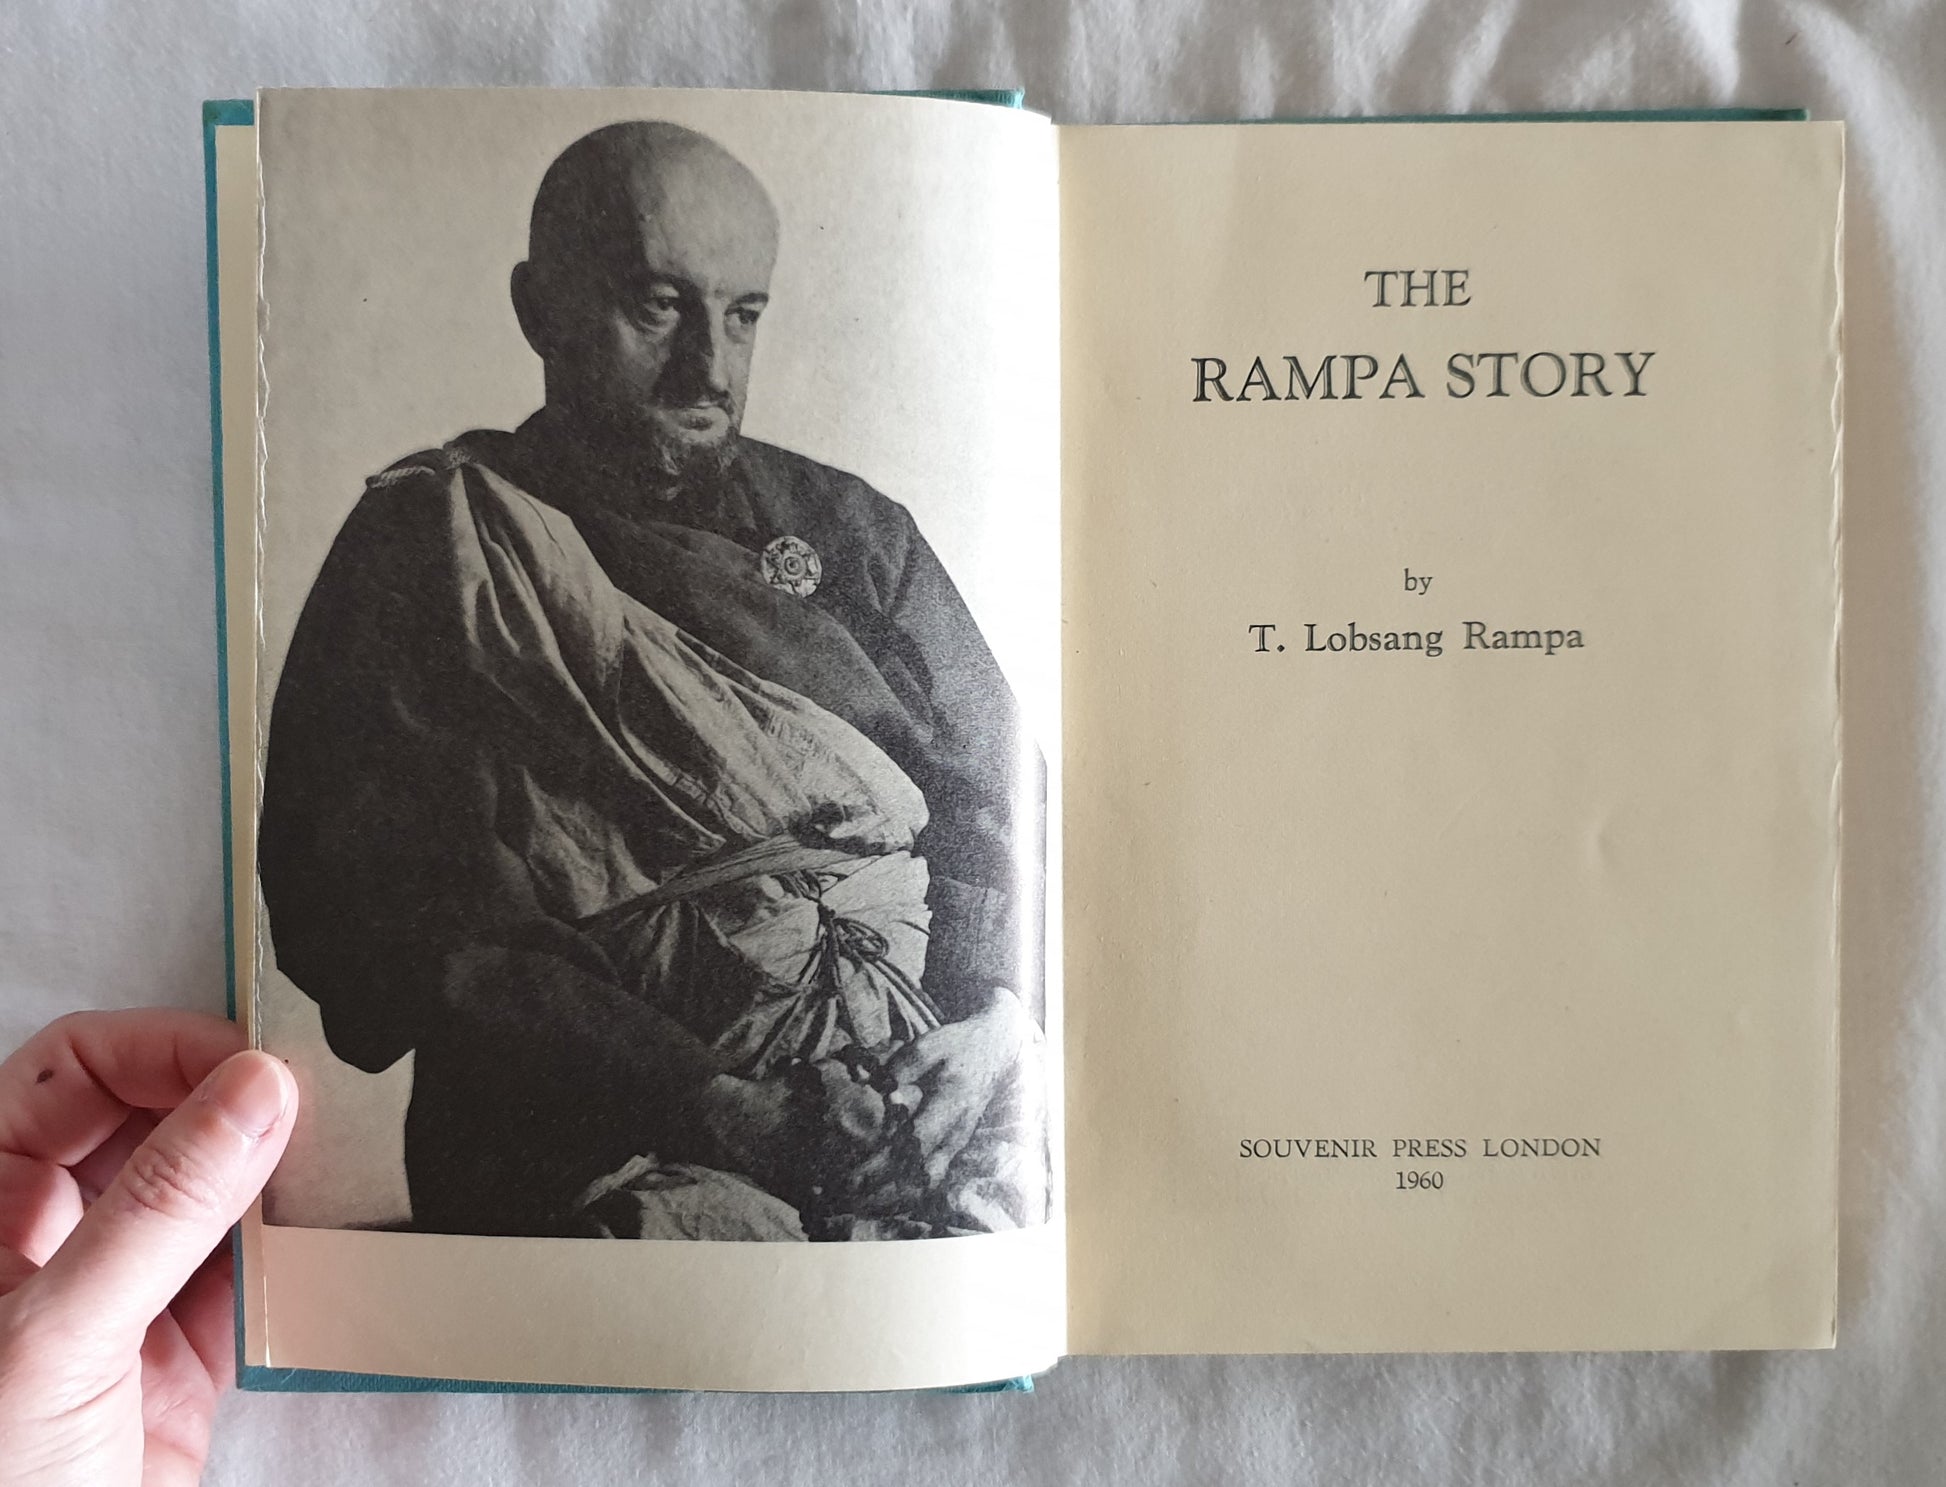 The Rampa Story by T. Lobsang Rampa